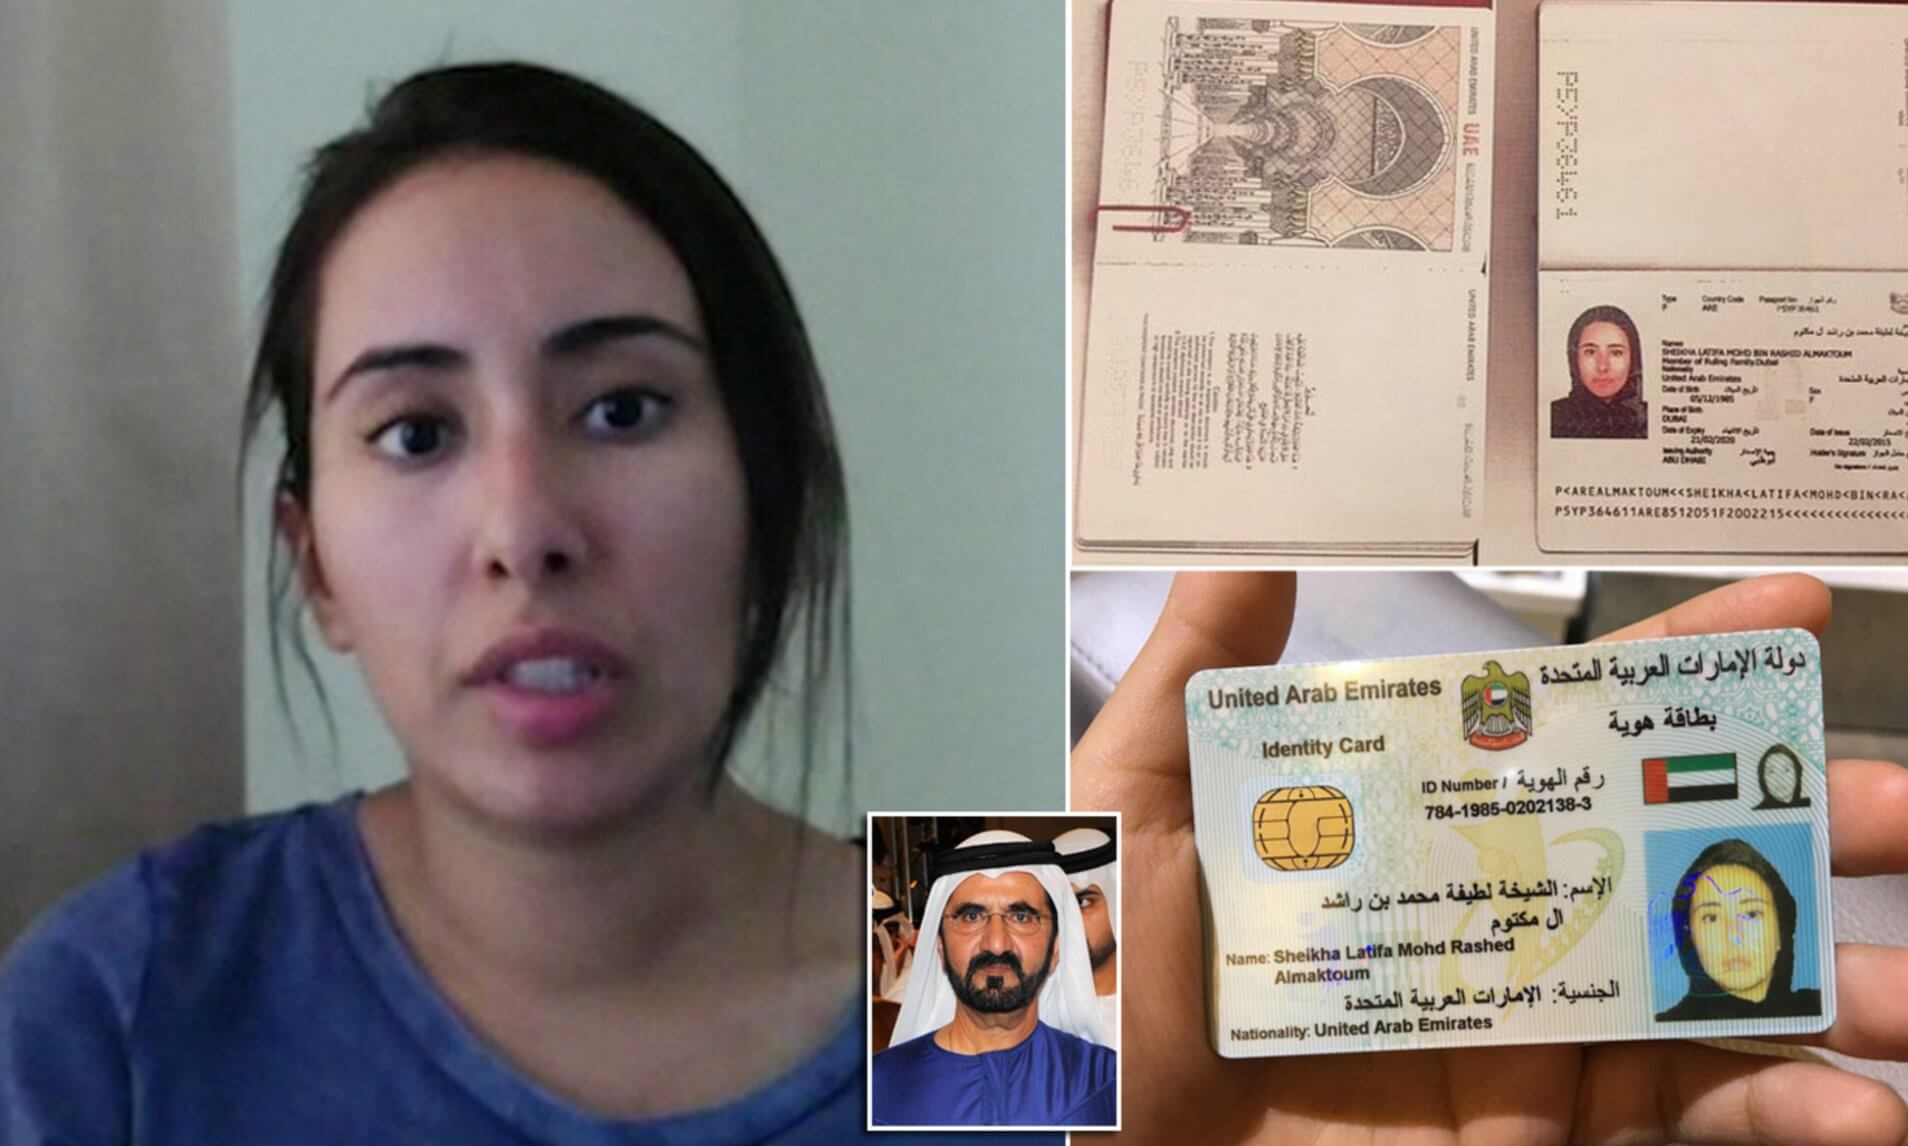 Dubai Princess Talks About Father S Supposed Tyrannical Crimes In Video Before Disappearing